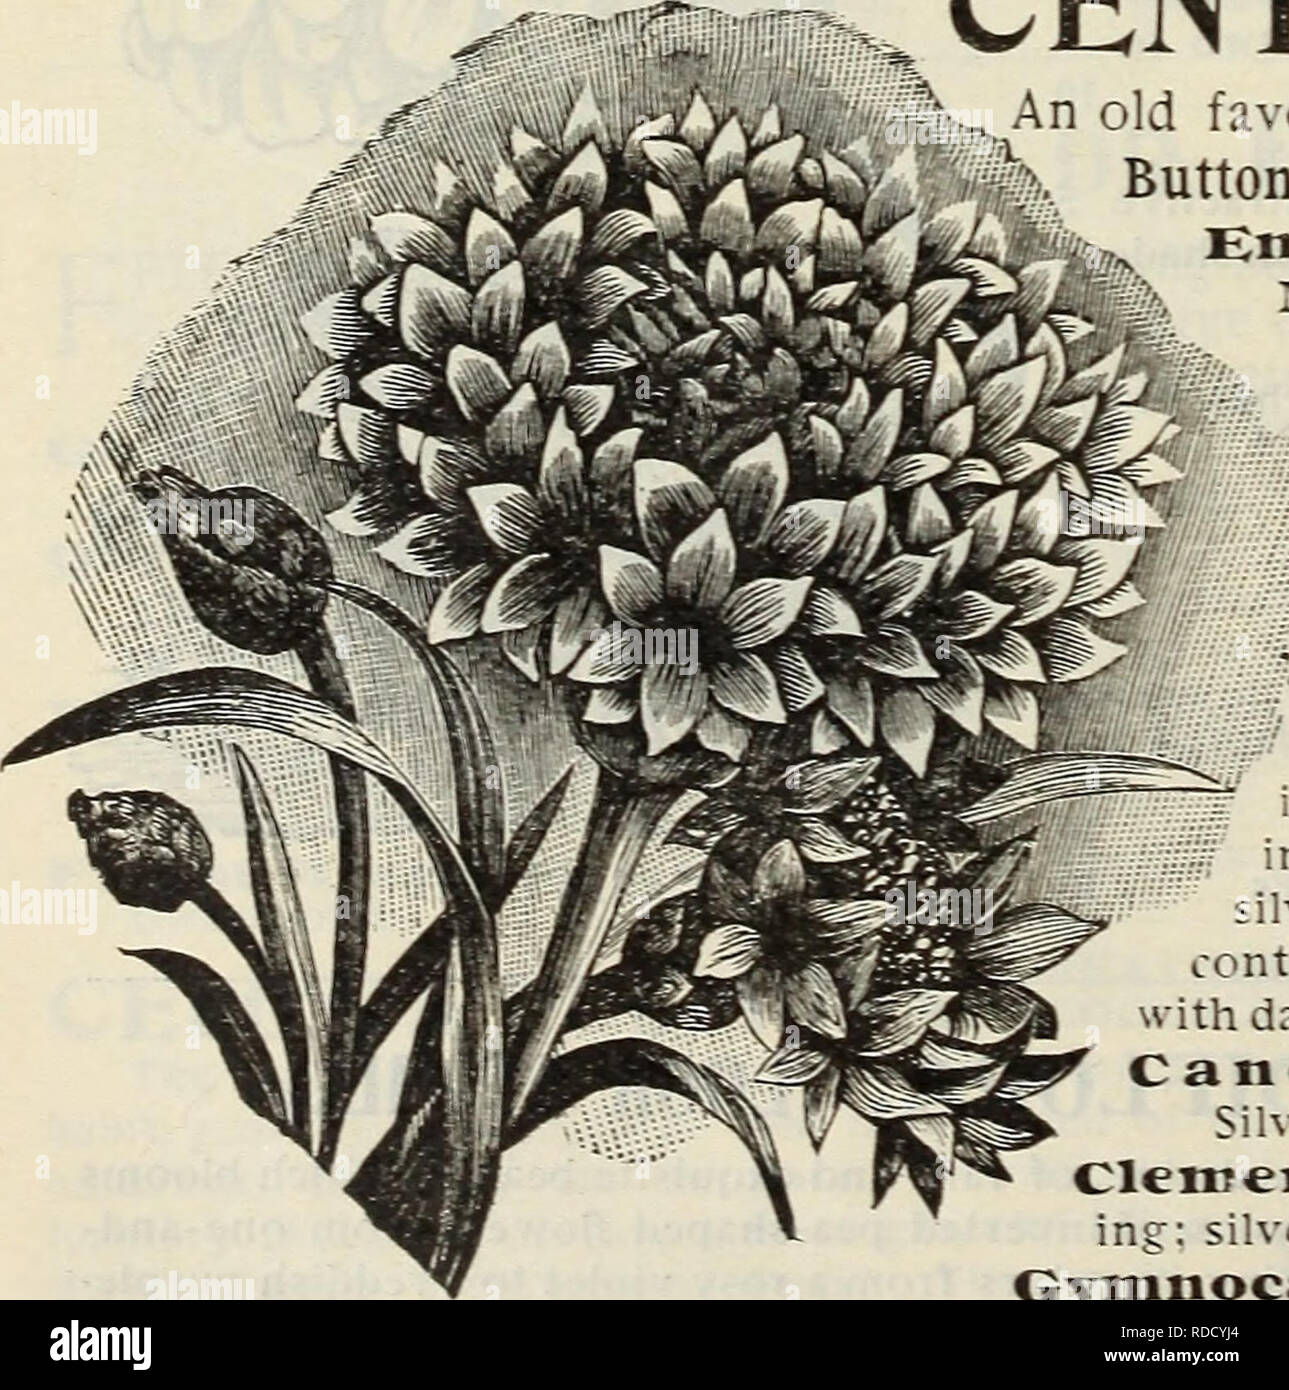 . E. H. Hunt : seedsman. Nurseries (Horticulture) Illinois Chicago Catalogs; Bulbs (Plants) Catalogs; Flowers Catalogs; Vegetables Seeds Catalogs; Plants, Ornamental Catalogs. DOUBLE CORNFLOWER. CENTAUREA CYANUS. An old favorite garden annual, also known as Bachelor's Button, Ragged Sailor, Corn Flower and Blue Bottle. Emperor William. Dark blue, very fine  5 Mixed. .Many colors S :%e&gt;v Double Cornflower. This variety produces double flowers of large size, form- j ing handsome globular flower heads 10 M Jloschata Sweet Sultan. Mixed. 5 f WHITE LEAVED CENTAUREAS. ' Valuable bedding plants, o Stock Photo